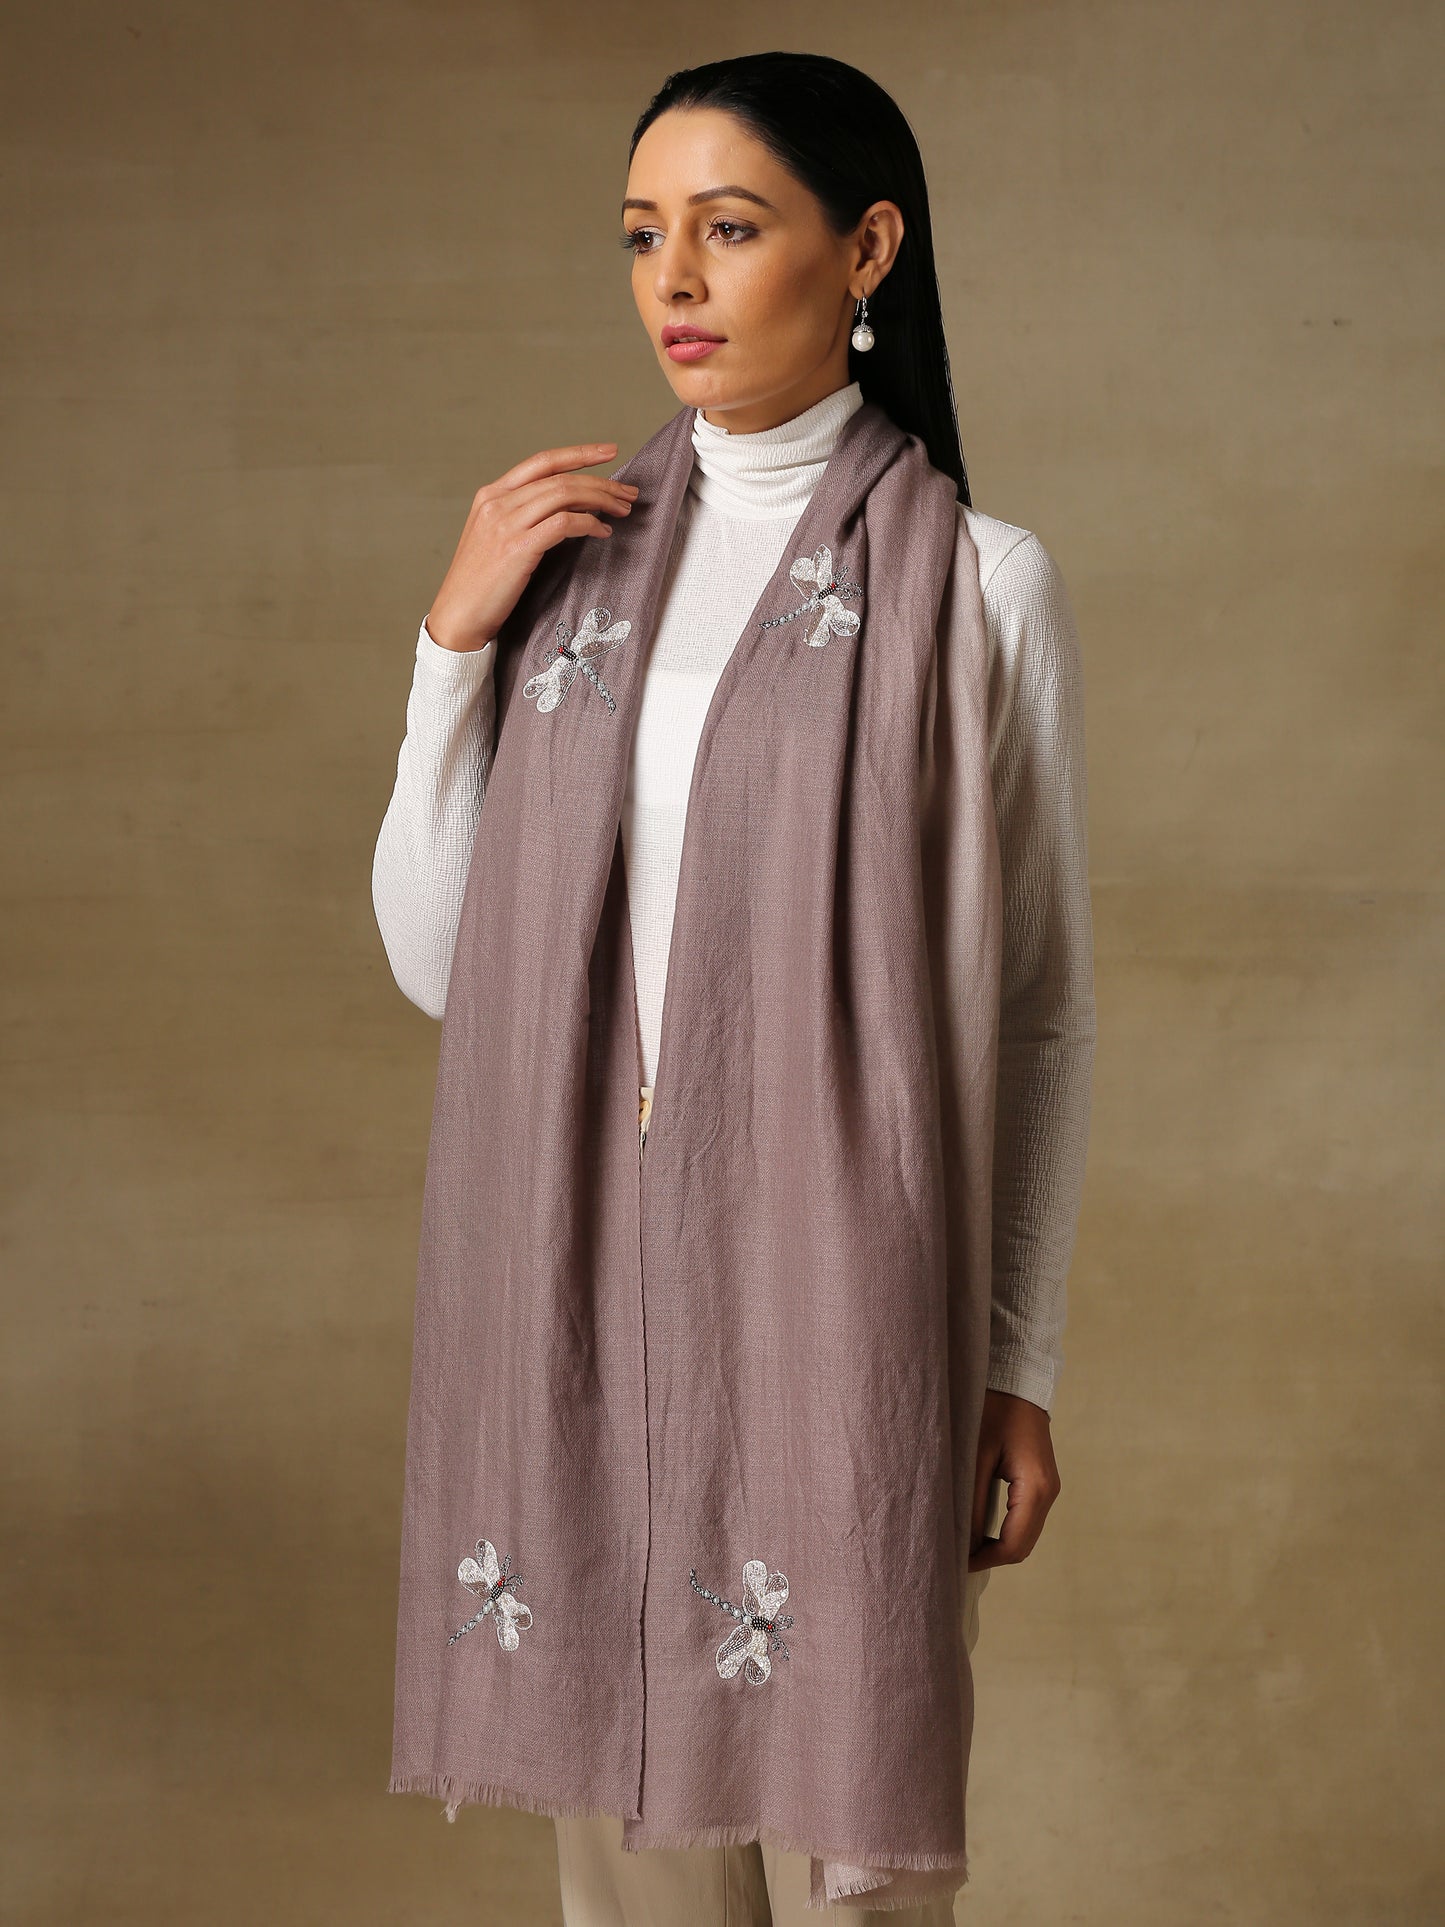 Model is wearing Dragonfly pashmina stole from shaza in the colour fog gray ombre, featuring dragonfly shapes hand embroidered using threadwork, cutdana, shellwork and pearls.